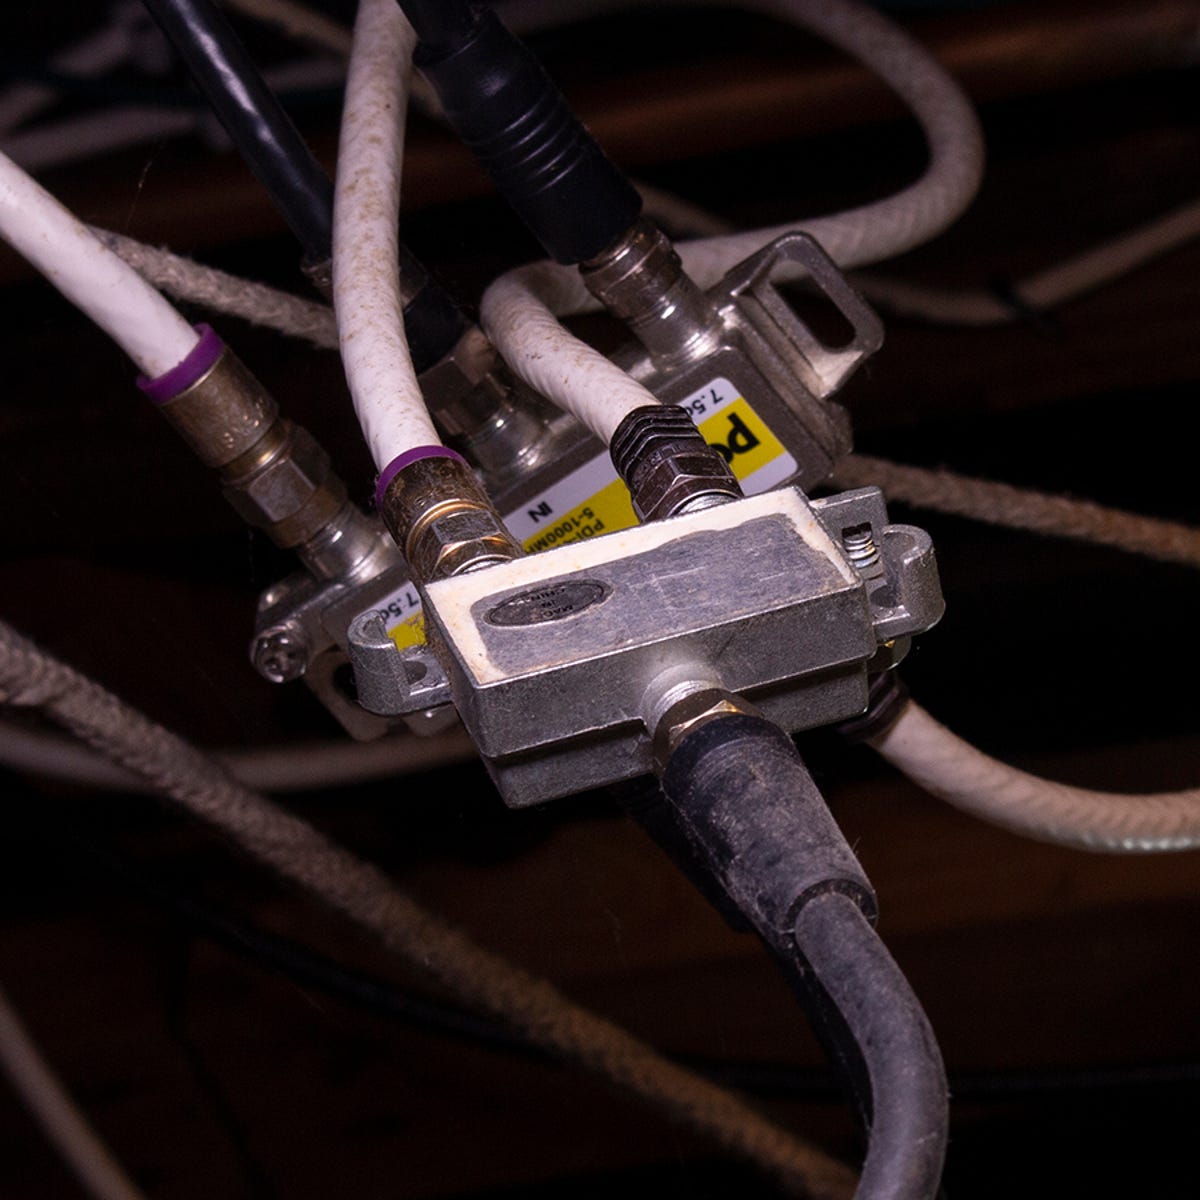 How to convert your home's old TV into powerful Ethernet lines |